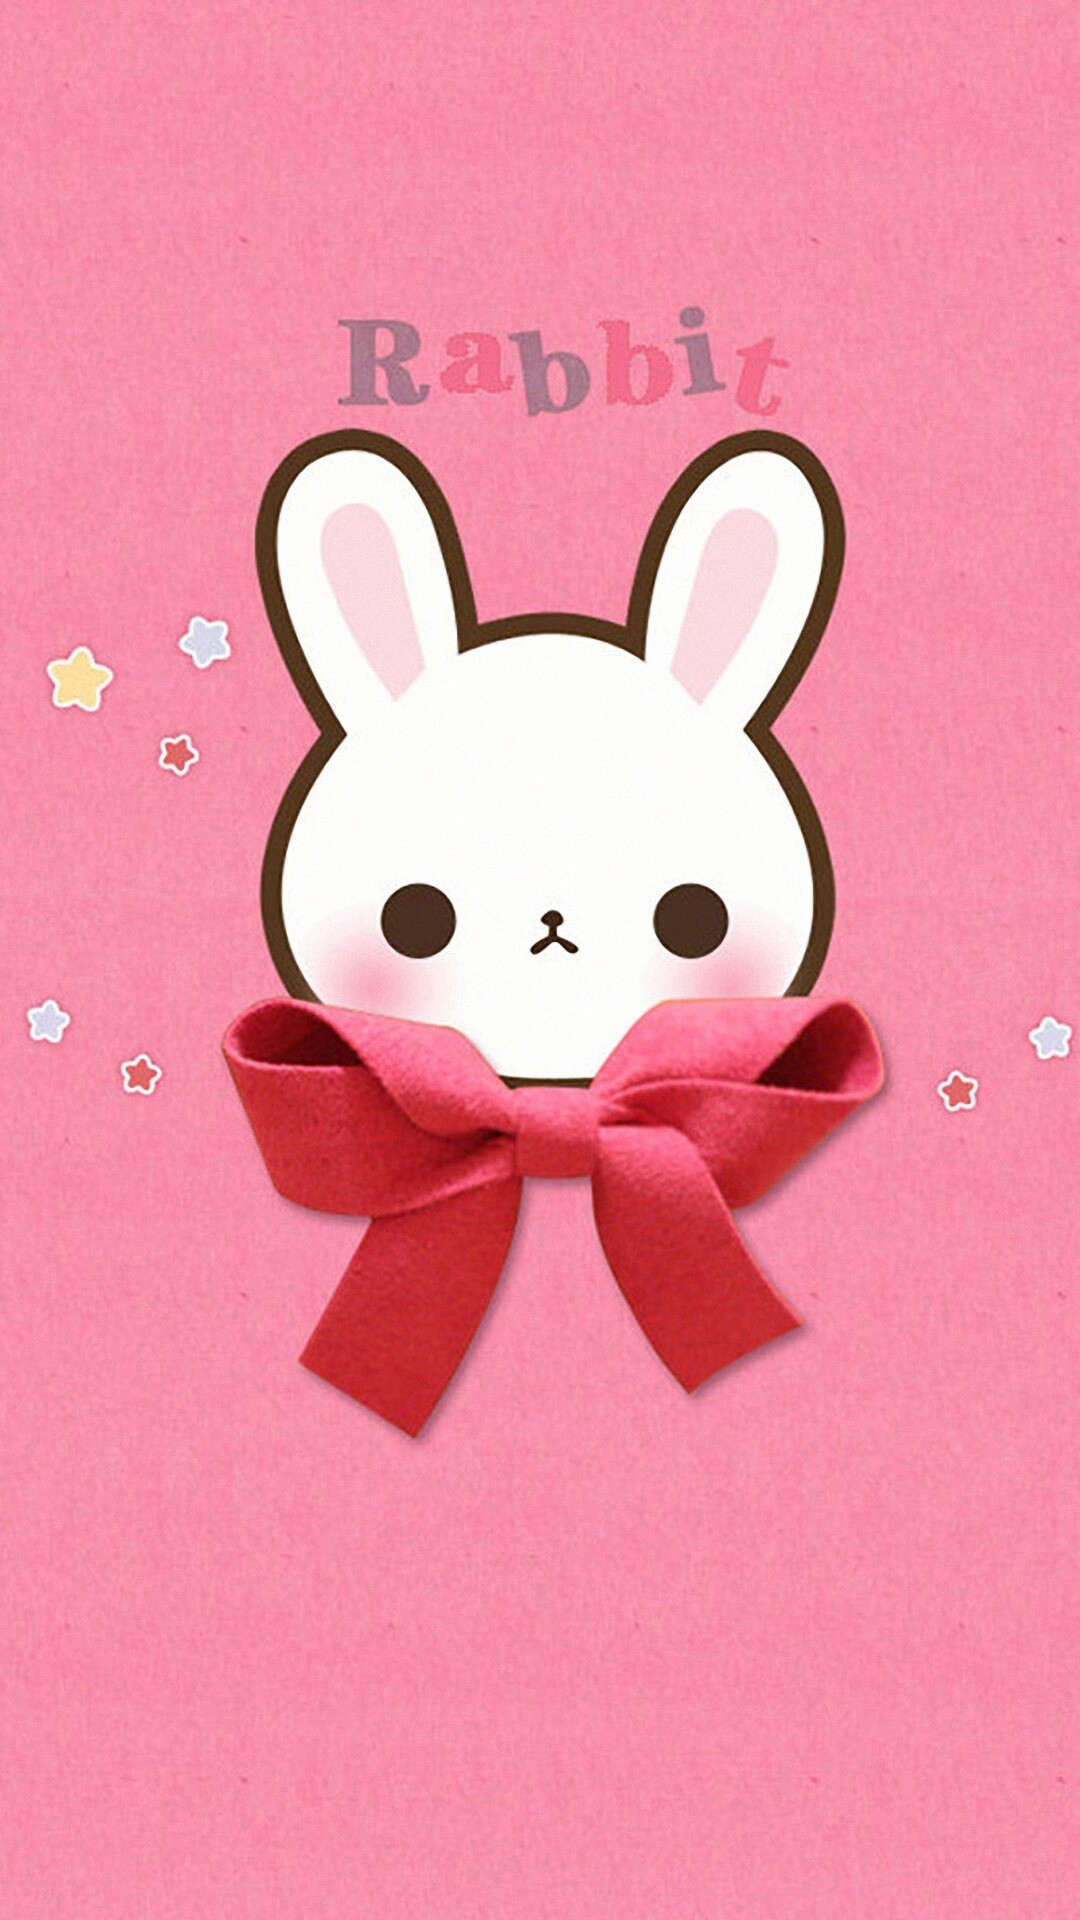 1080x1920 ... Cute Wallpaper For Android Phone ...